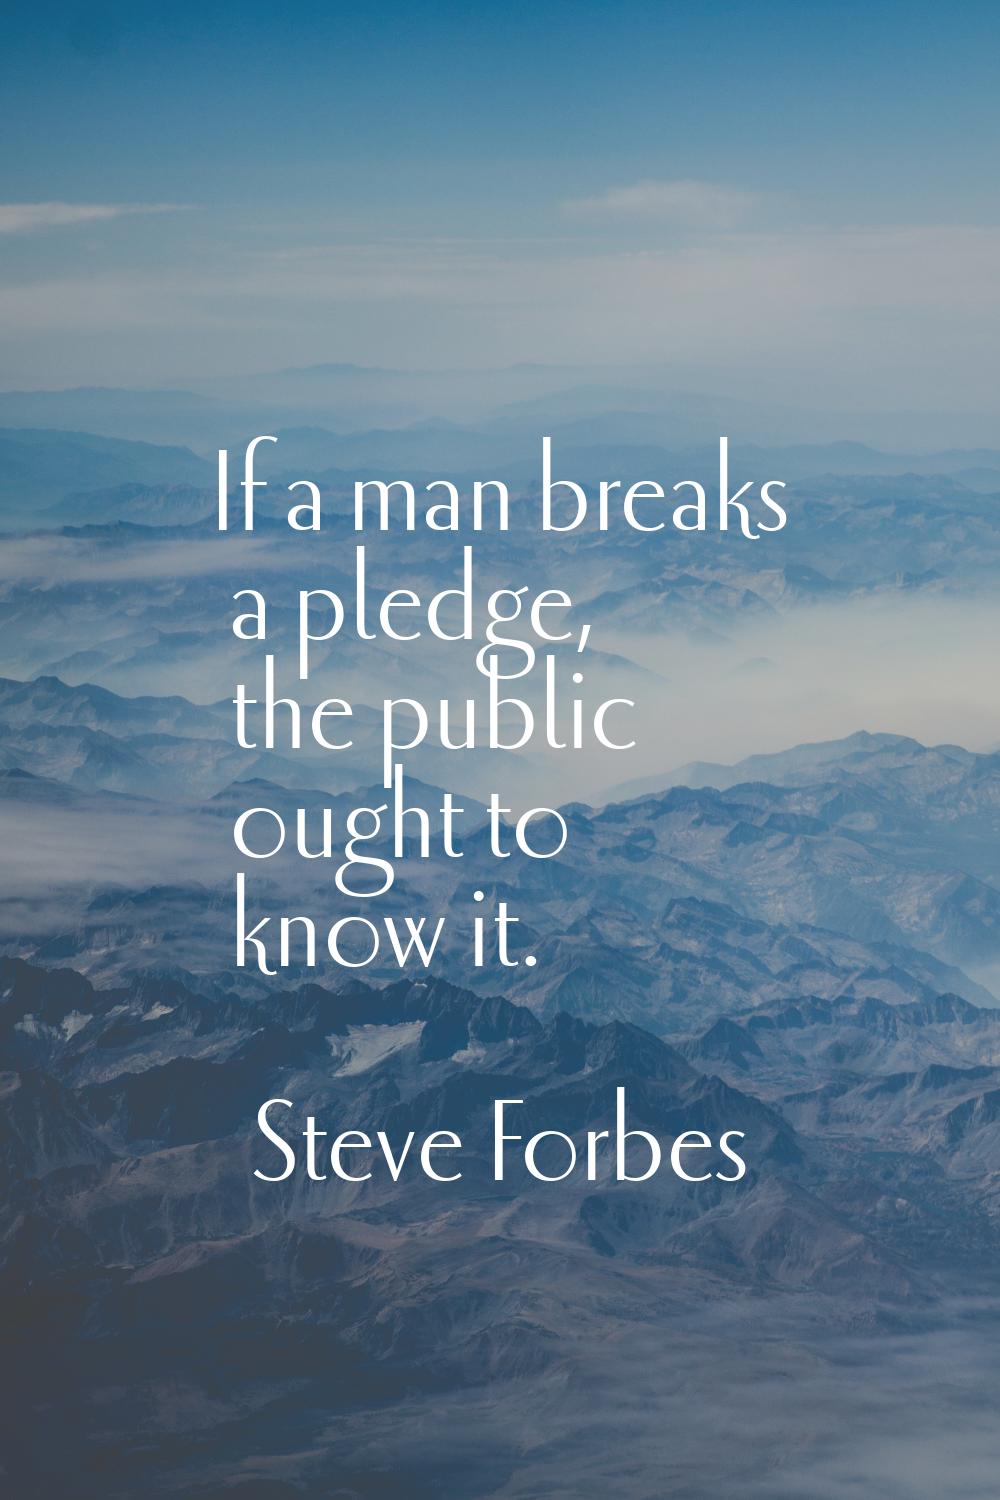 If a man breaks a pledge, the public ought to know it.